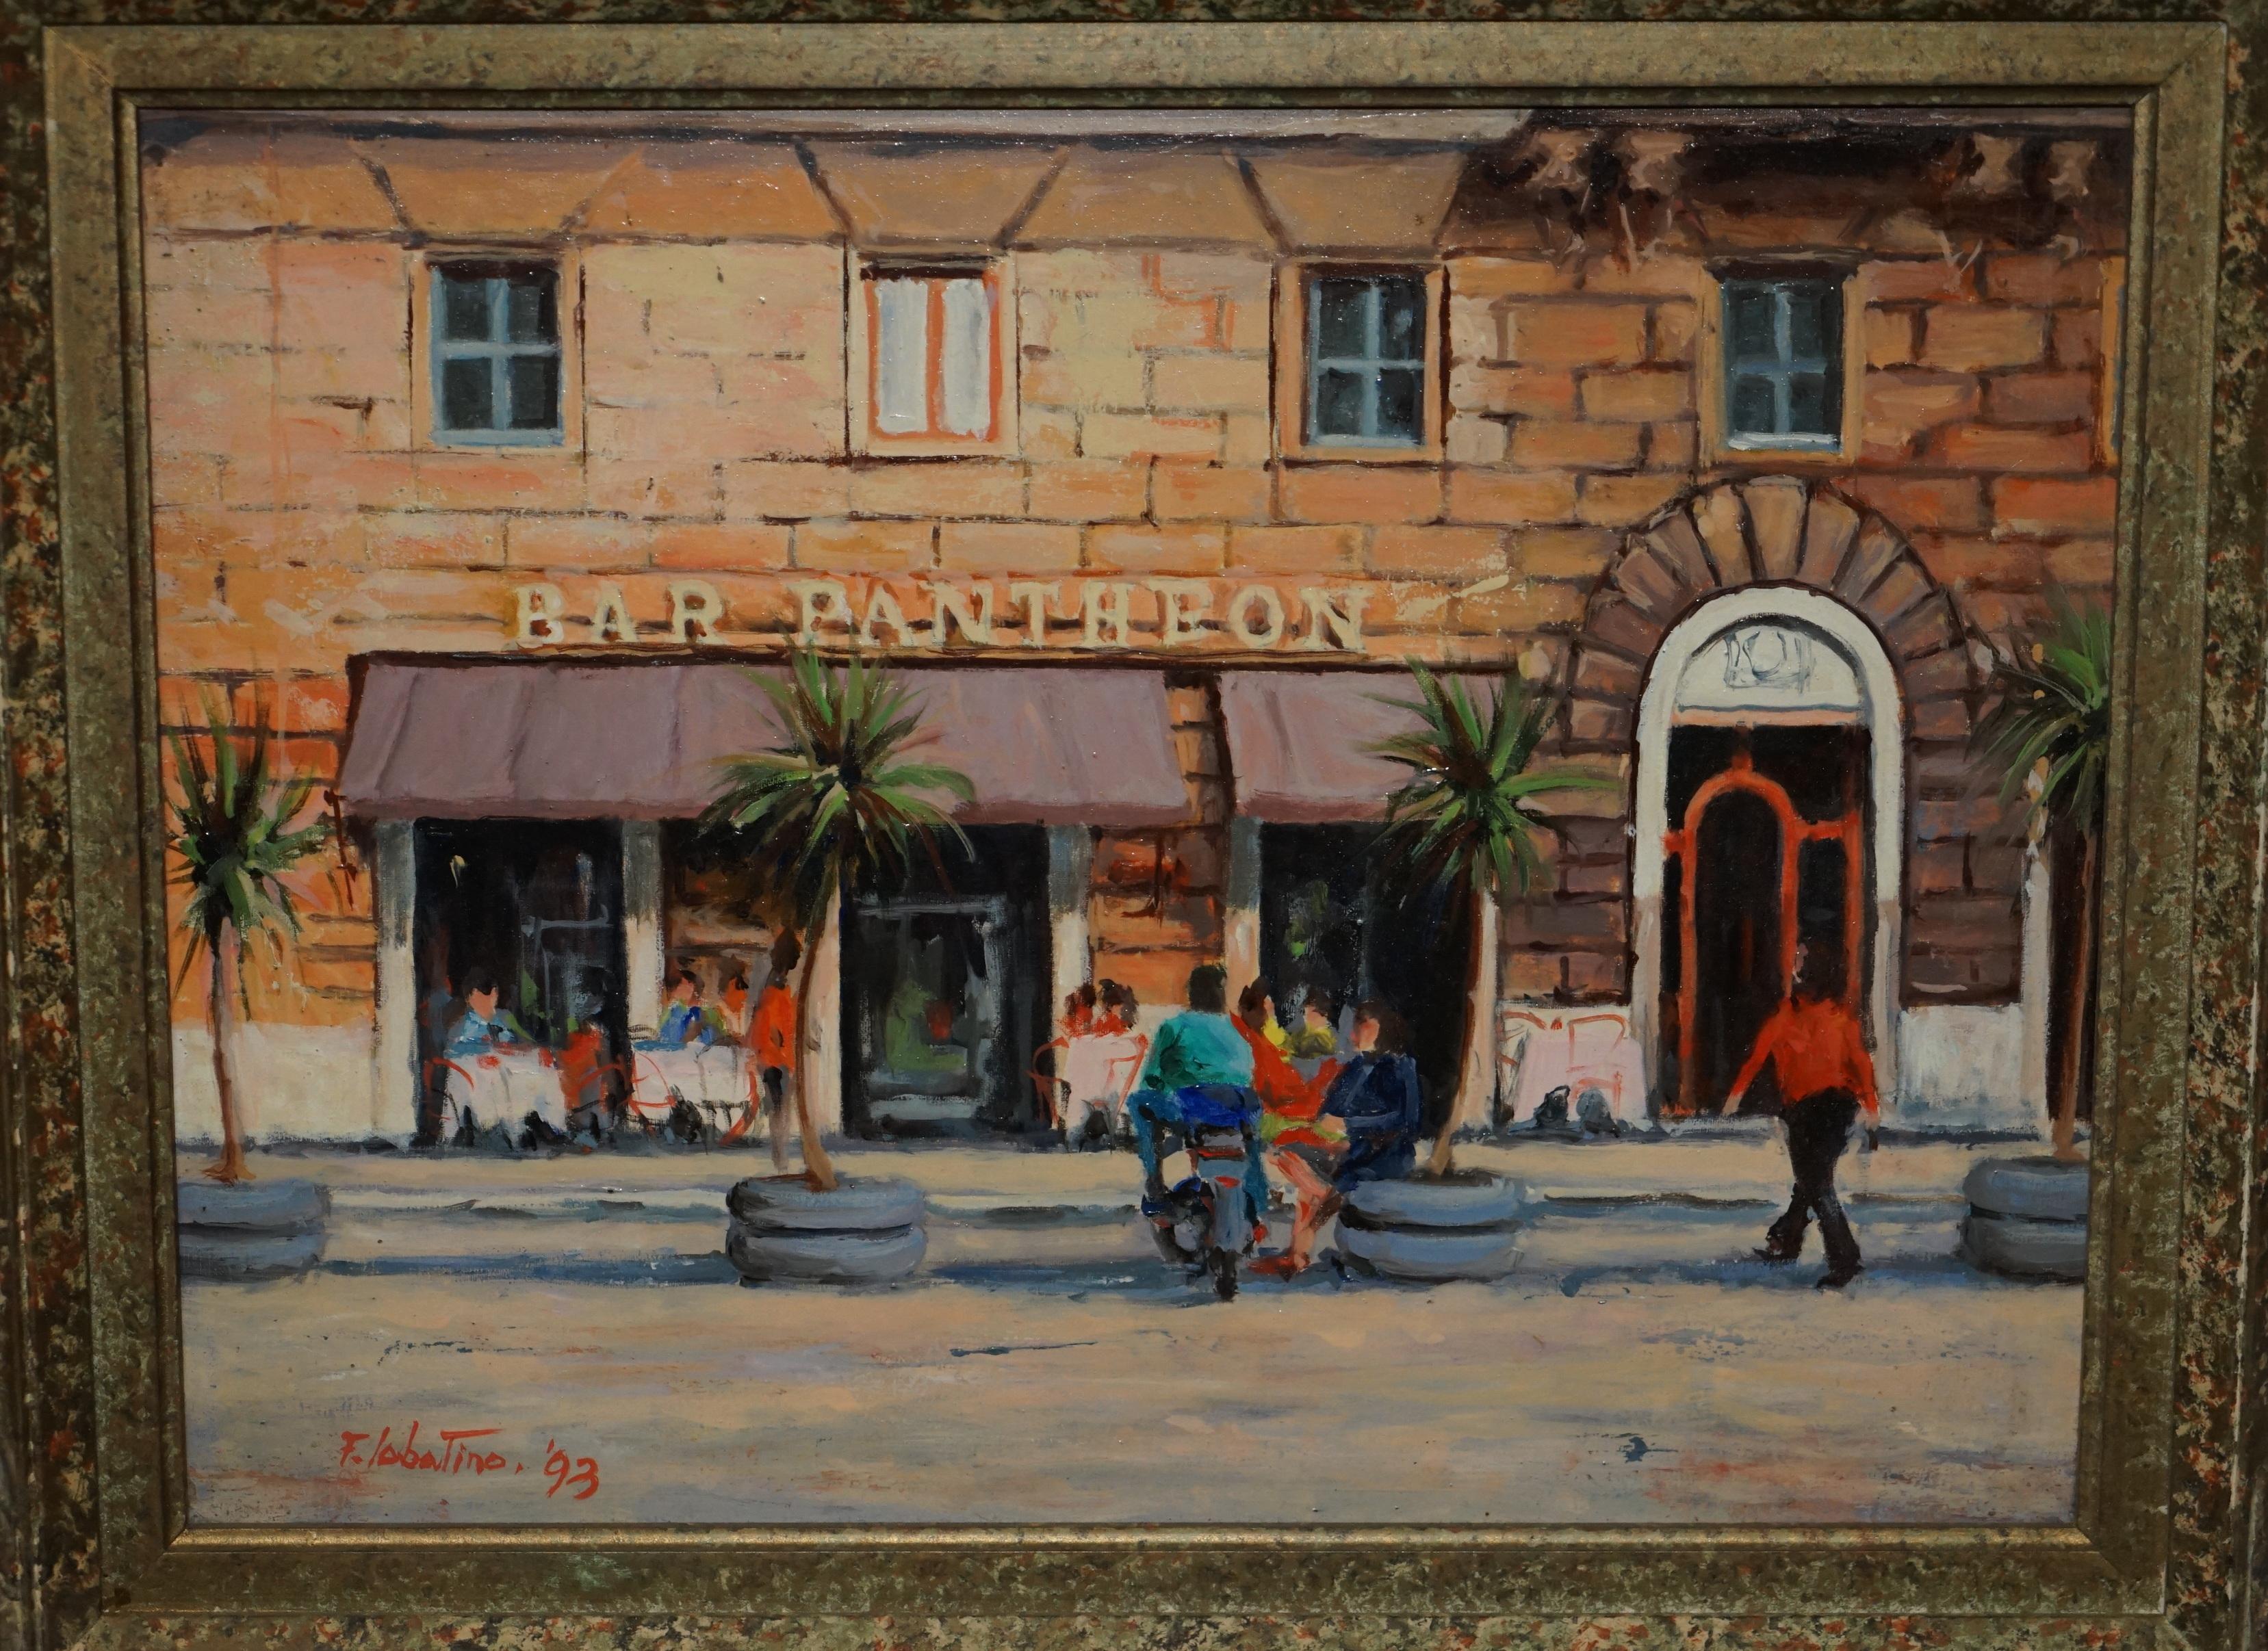 We are delighted to offer for sale this stunning original 1893 F.Labatino oil painting of the Bar Pantheon 

This piece is exceptionally well executed, the colours, the strokes, everything has clearly been worked at the hands of a very confident